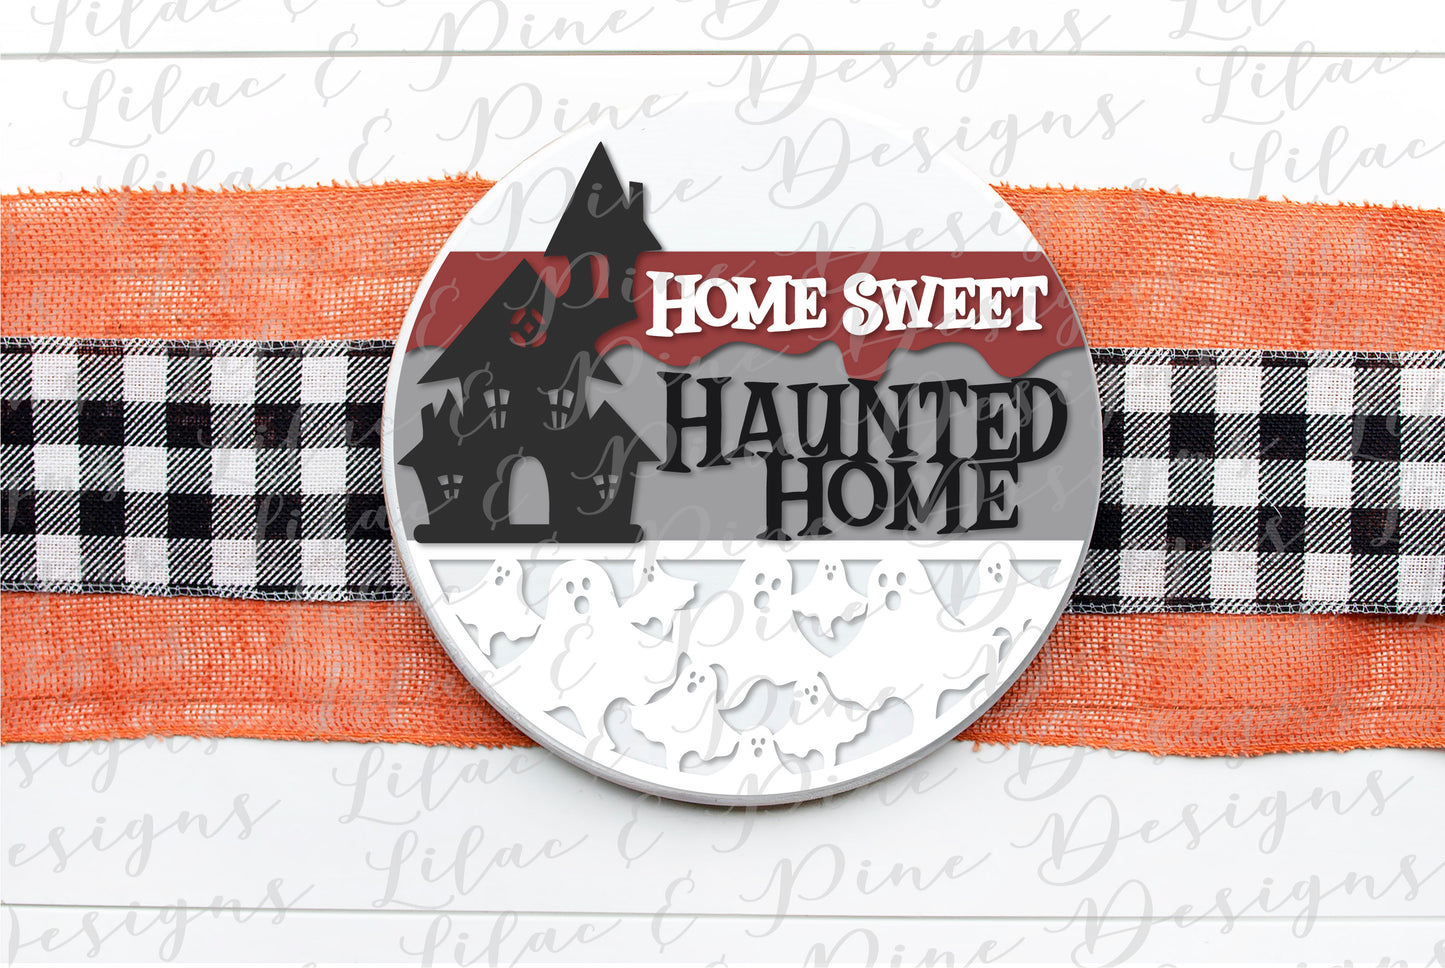 Home Sweet Haunted Home Sign SVG, Halloween Welcome SVG, Spooky SVG, Ghost SVG, Haunted House Door Round, Happy Halloween SVG, Halloween decor, laser cut file, Glowforge SVG